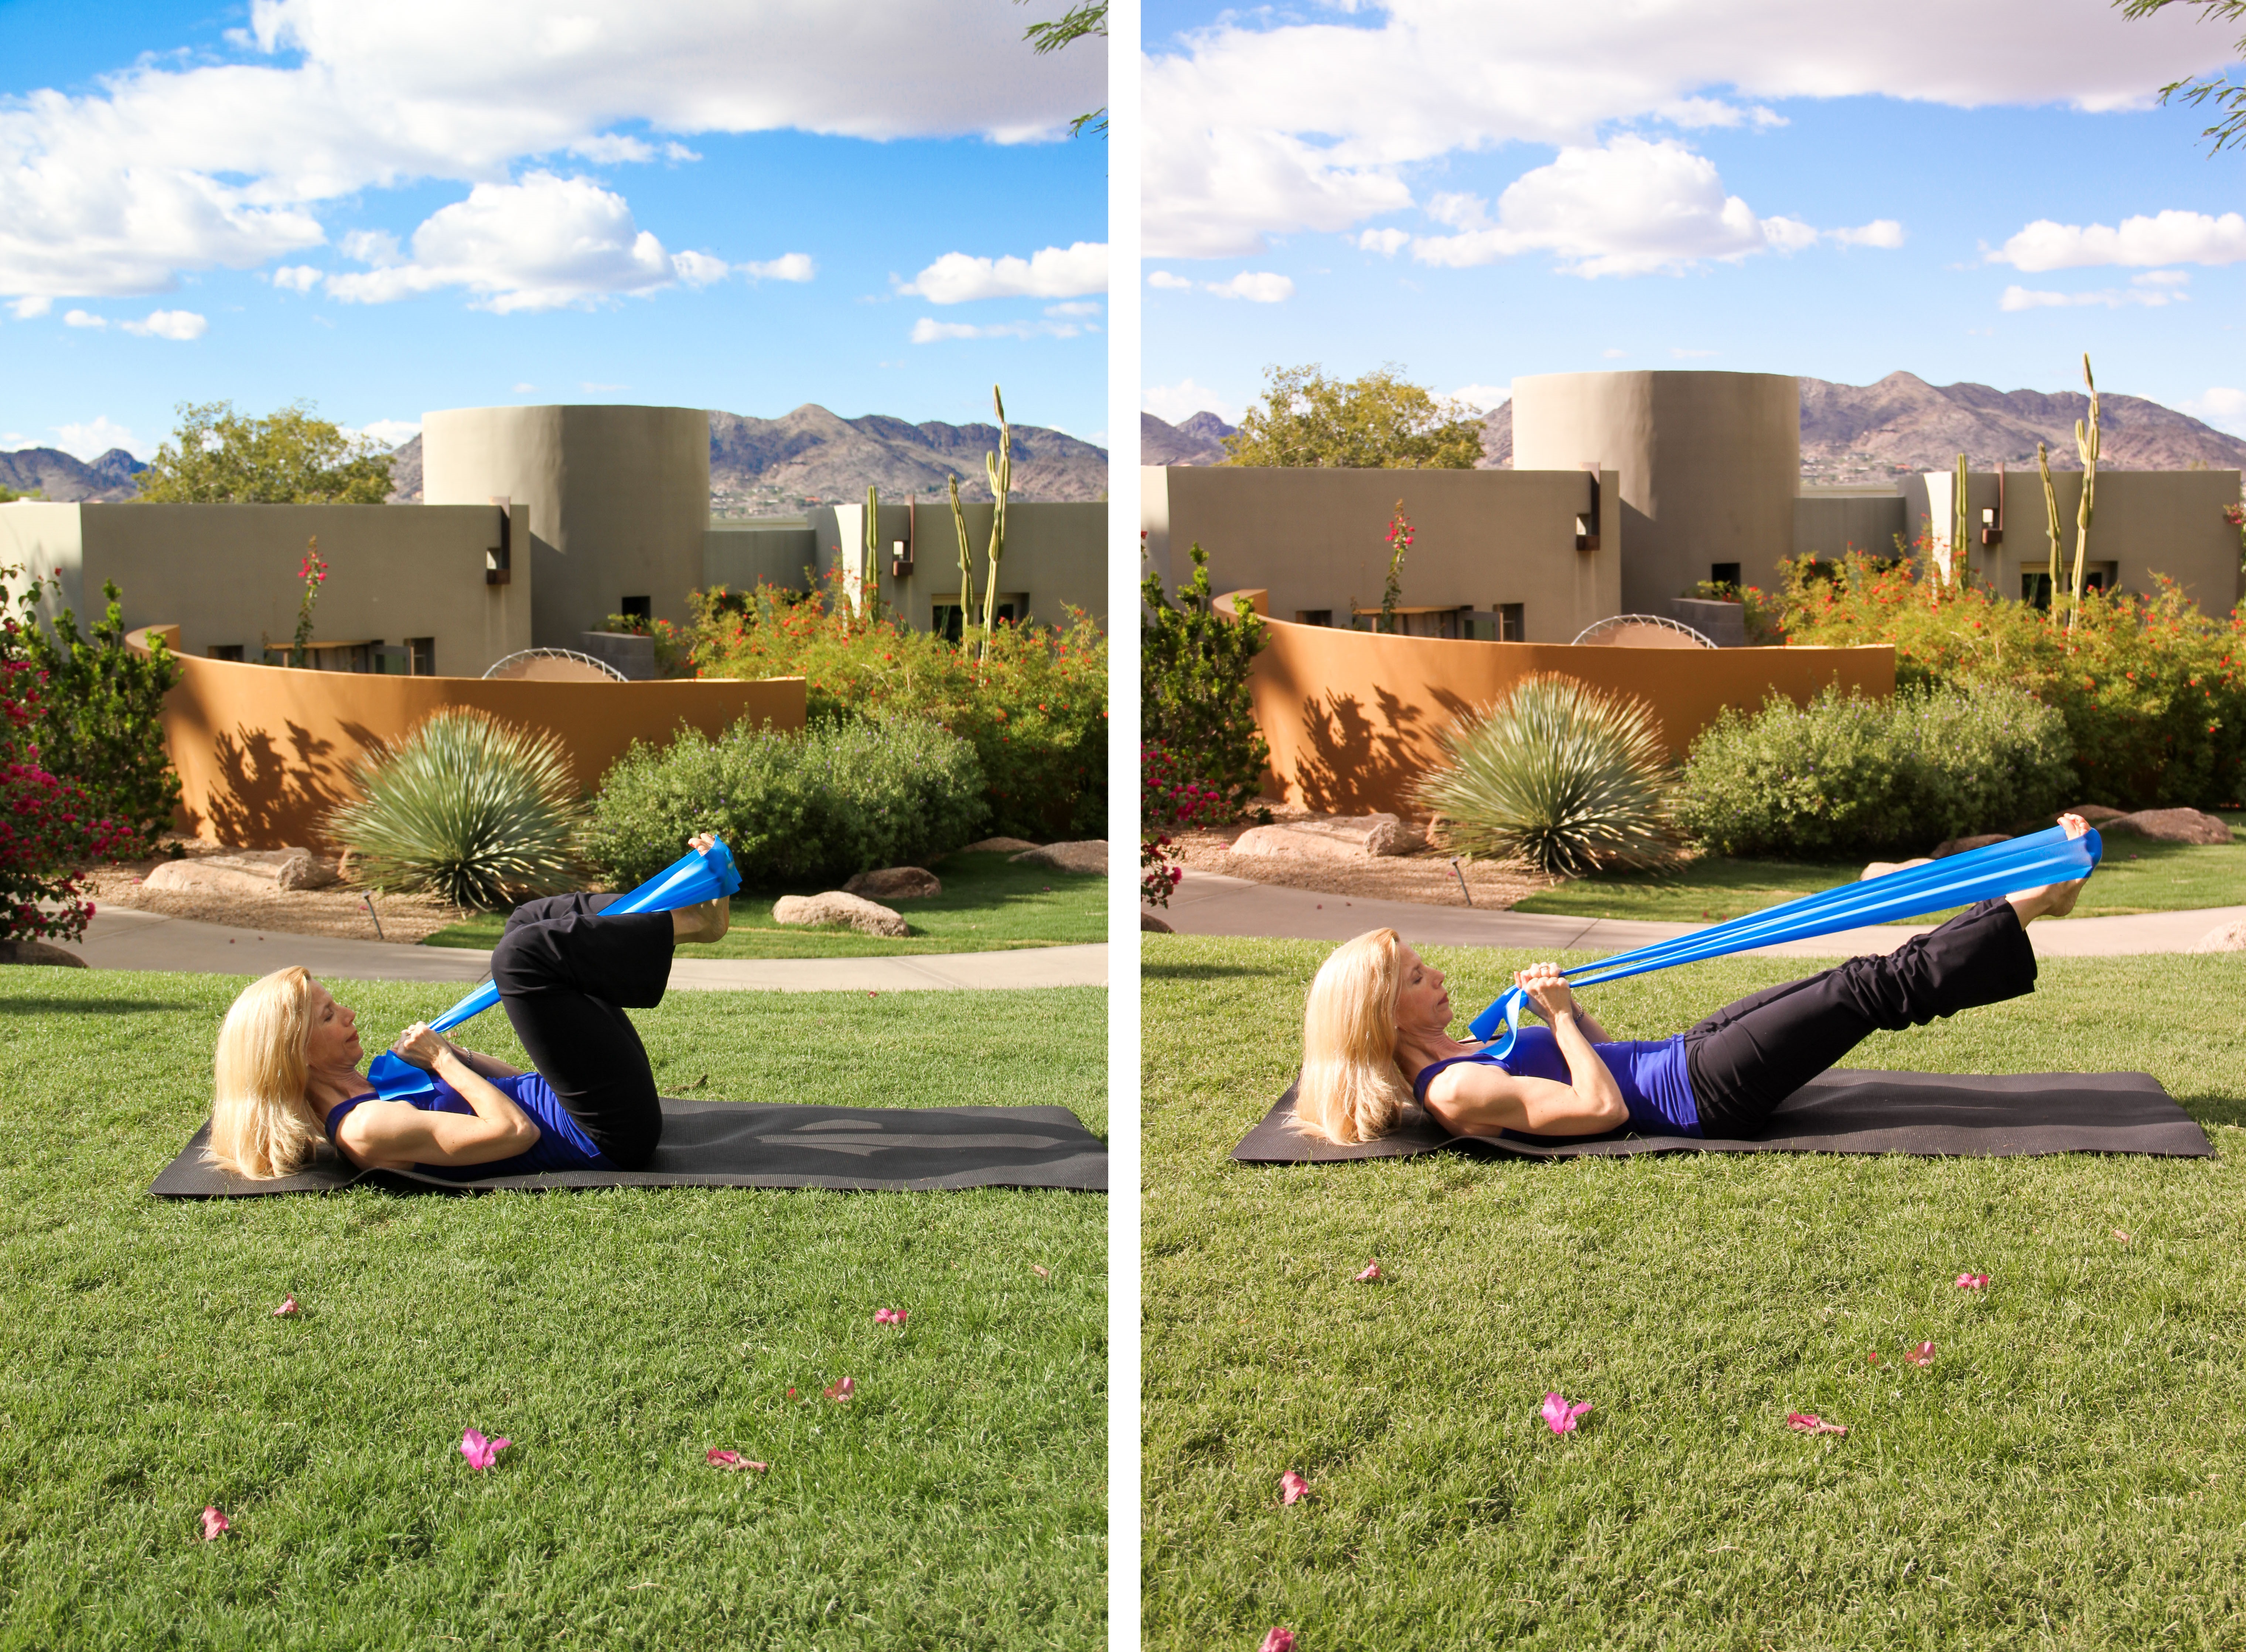 6 Lower-Body Strengthening Exercises with the Flex Band - Spafinder